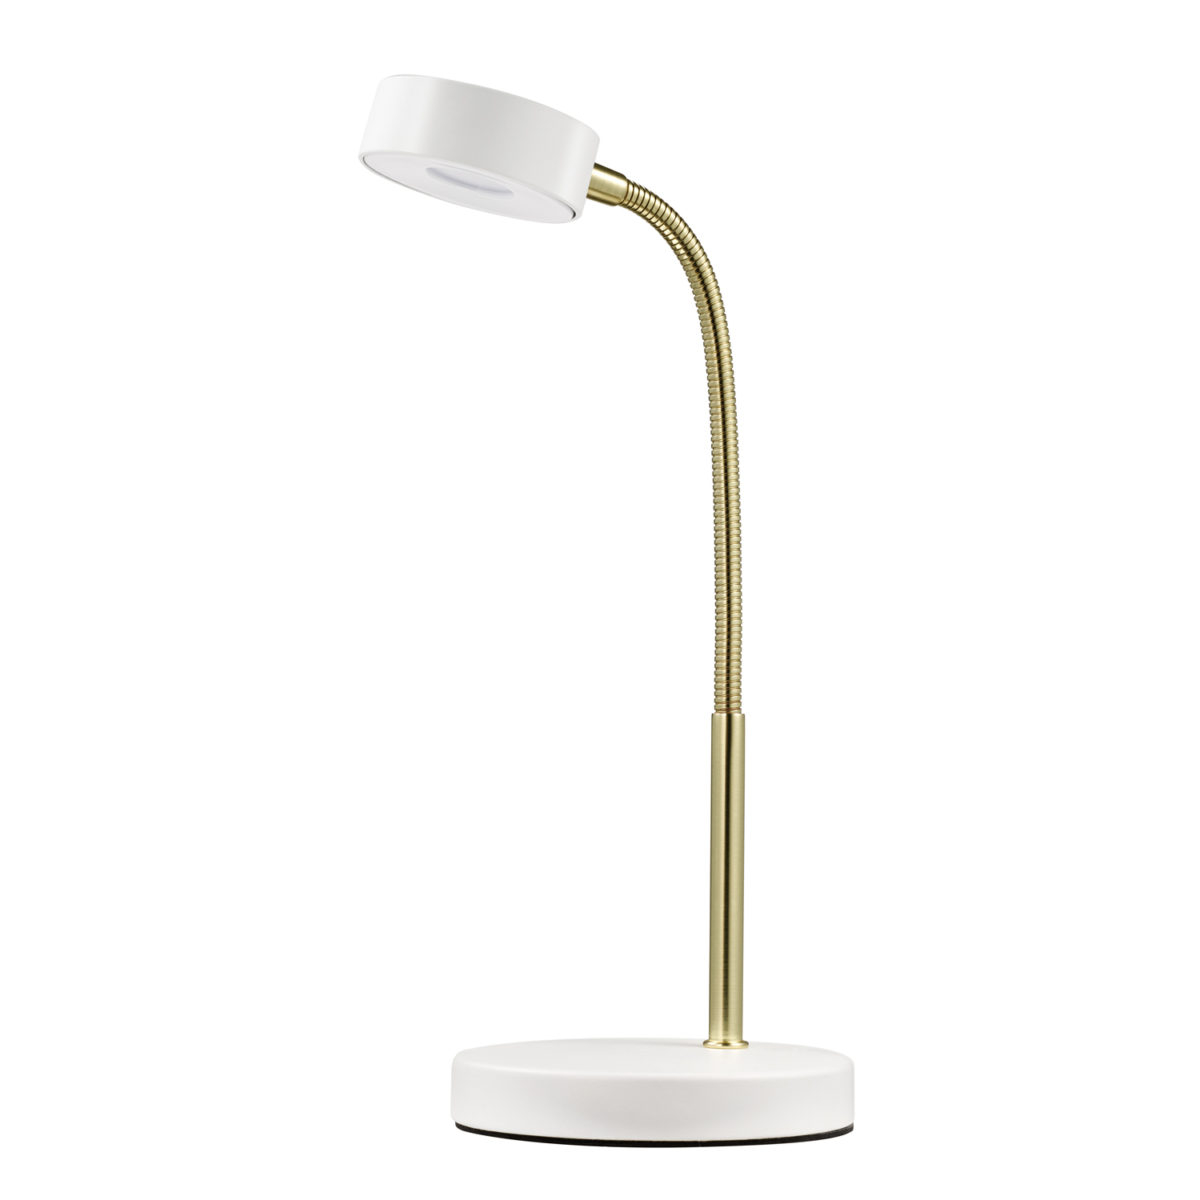 Led Floor Lamp Torchiere Energy Star Certified Dimmable pertaining to measurements 1200 X 1200